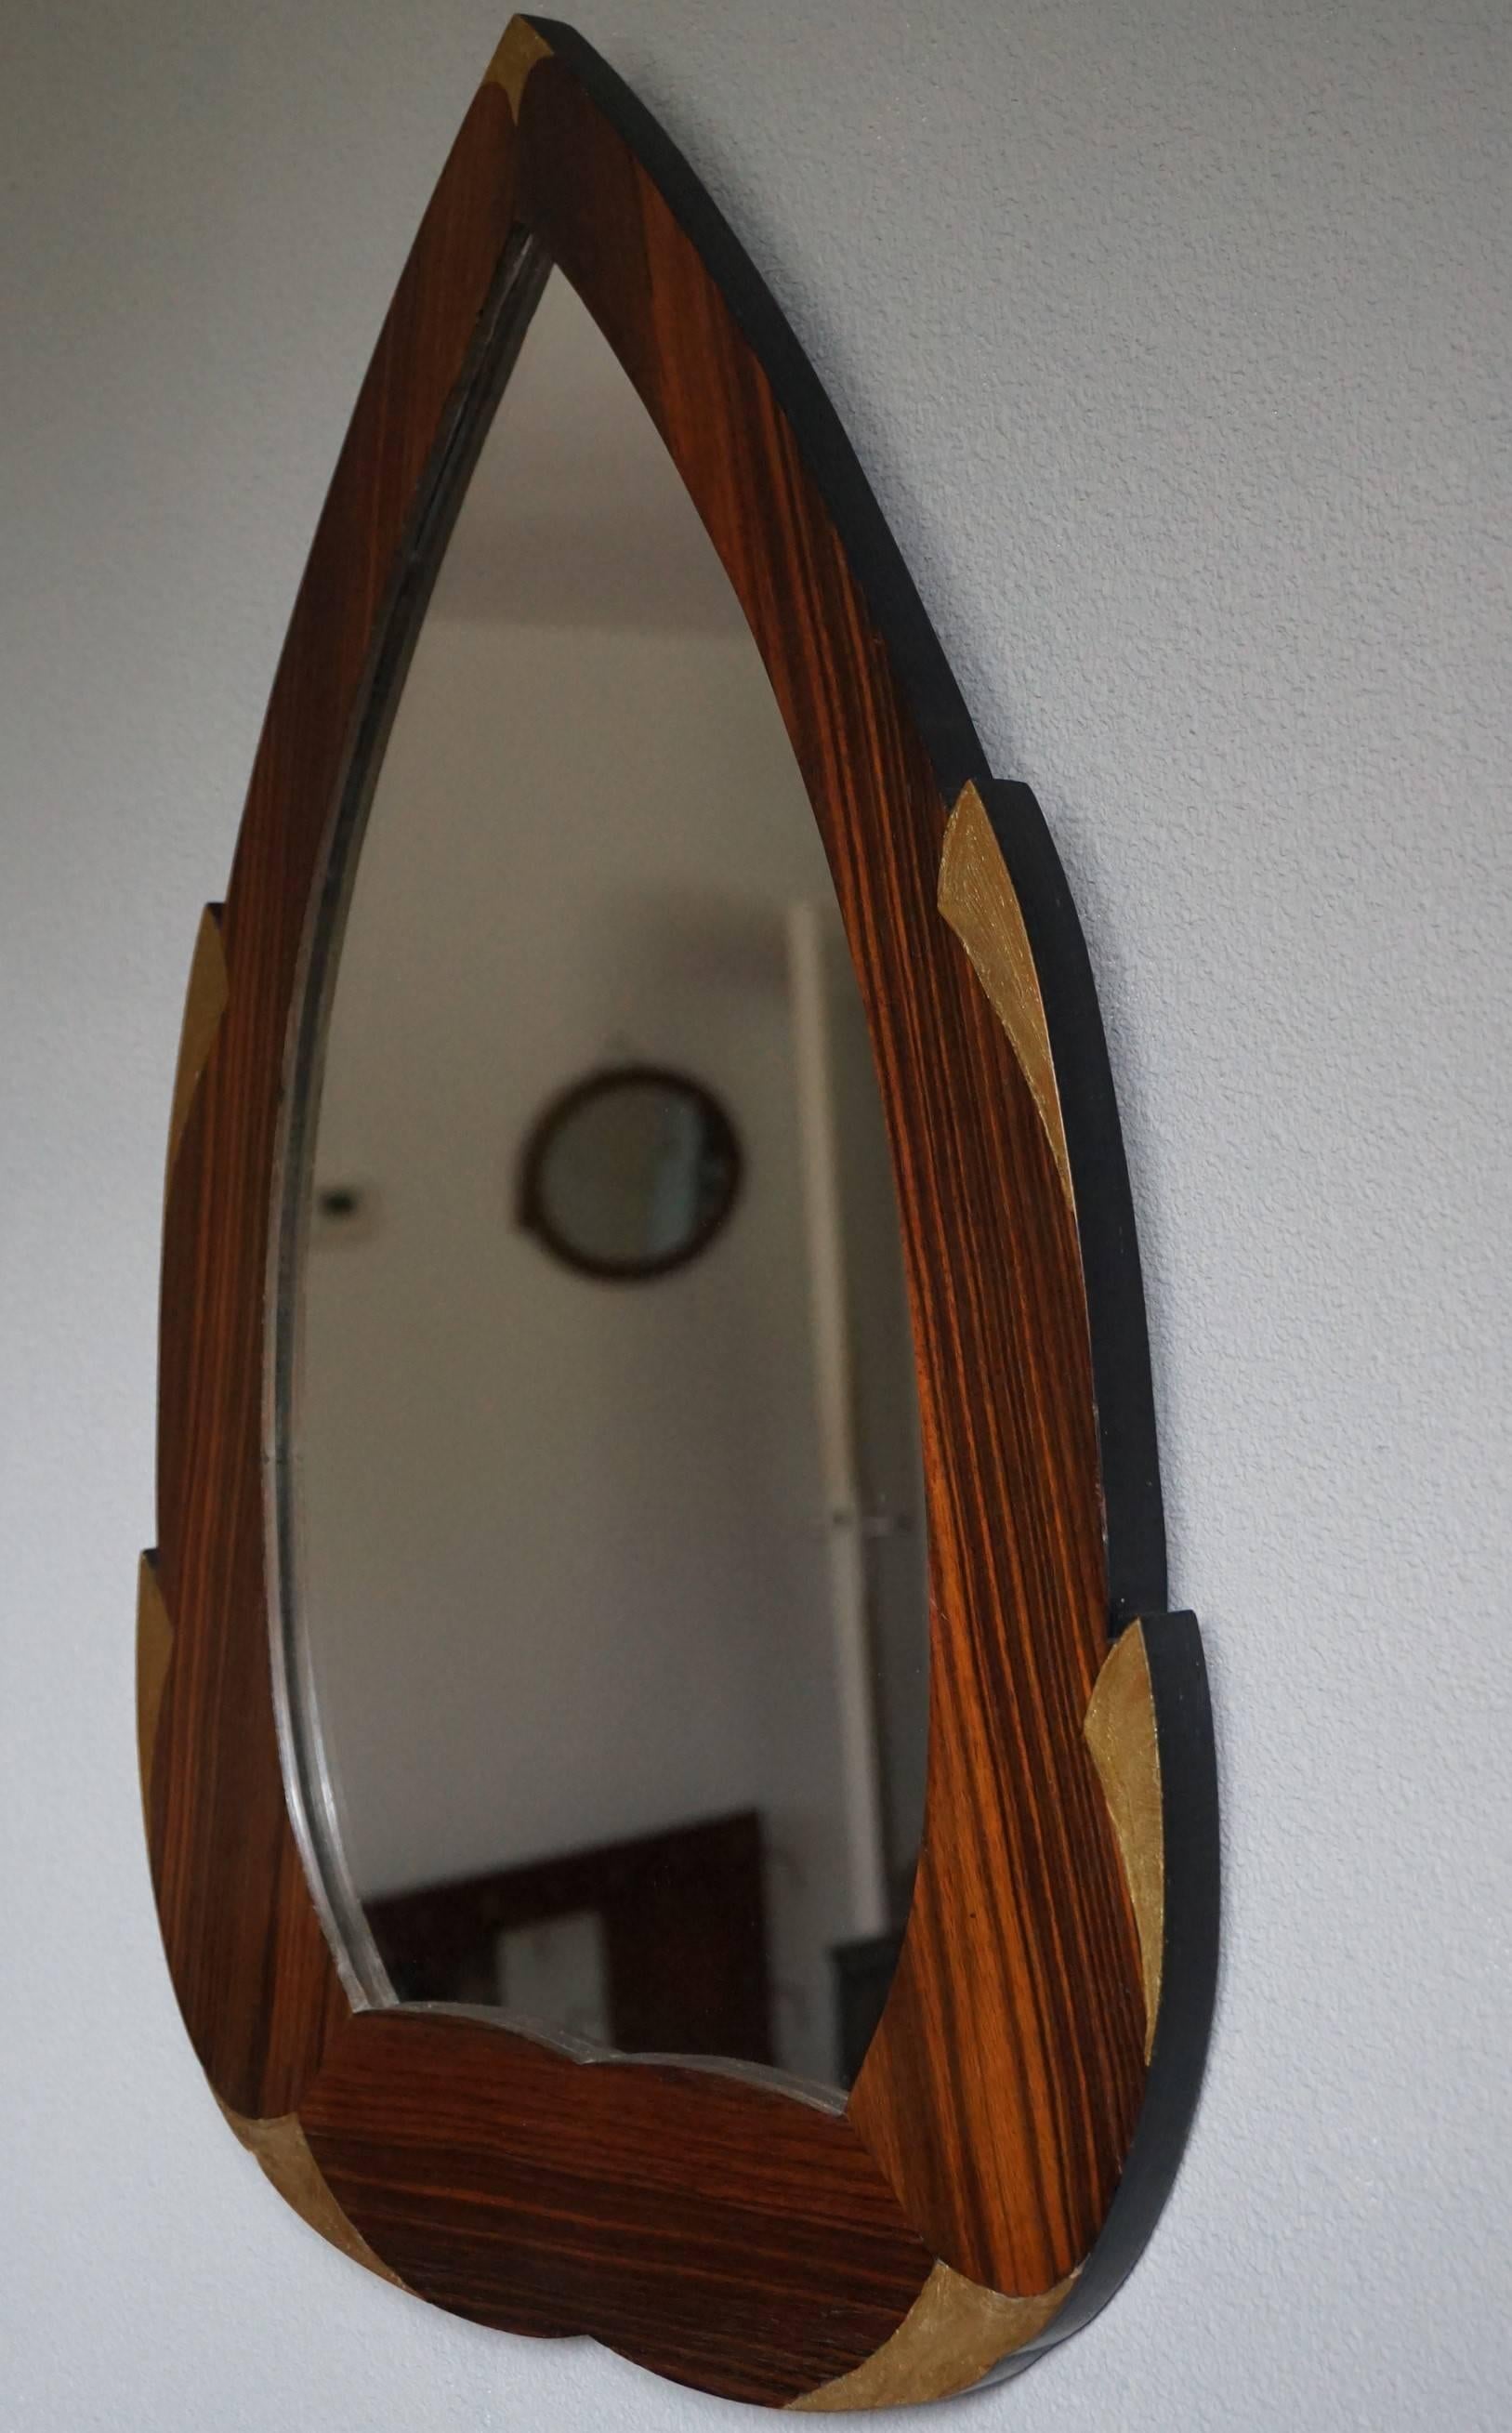 Glamorous and practical French Art Deco mirror.

This handcrafted, Art Deco mirror from the 1920s is beautiful in shape and design and it is also practical in size. The cocobolo wooden frame comes with hand-painted, golden color style elements and